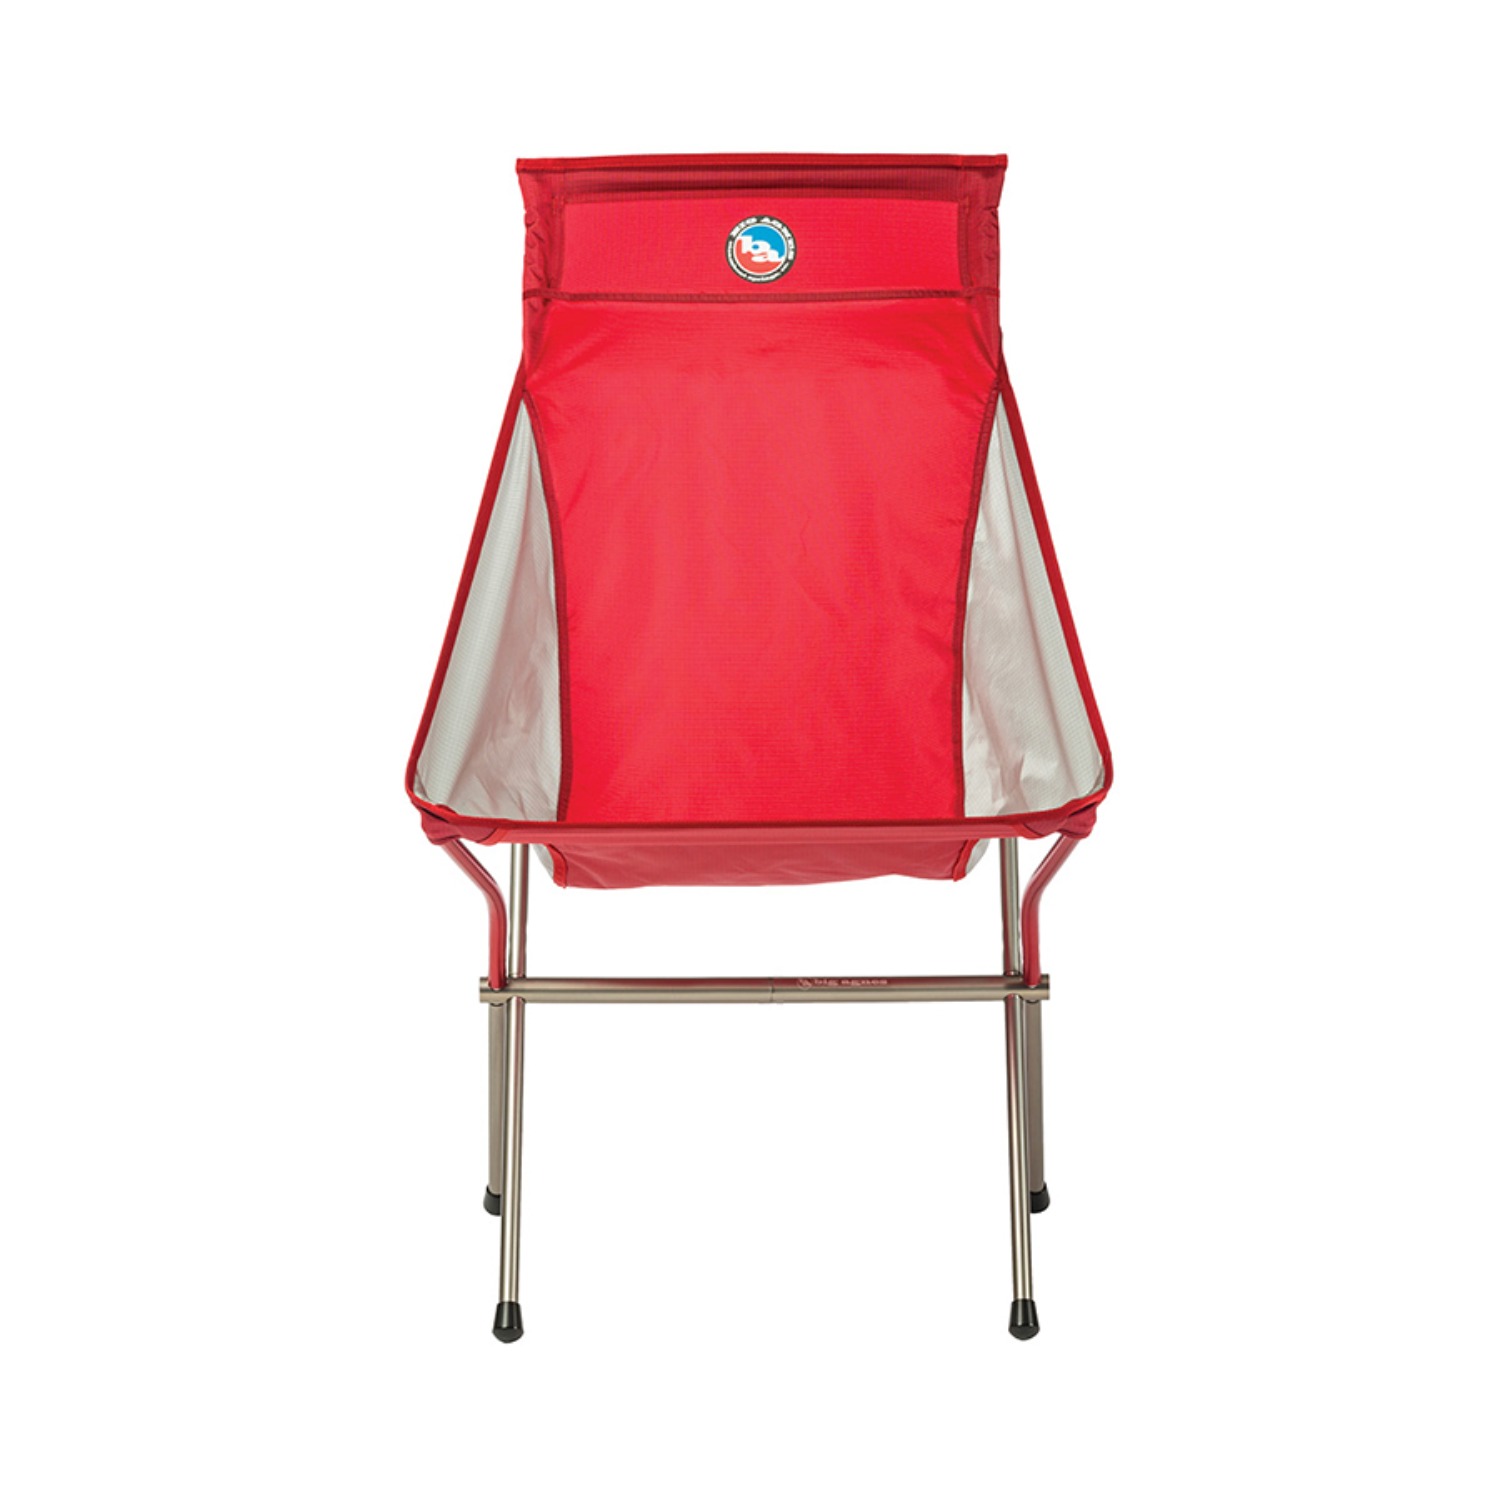 Big Six Camp Chair - Red